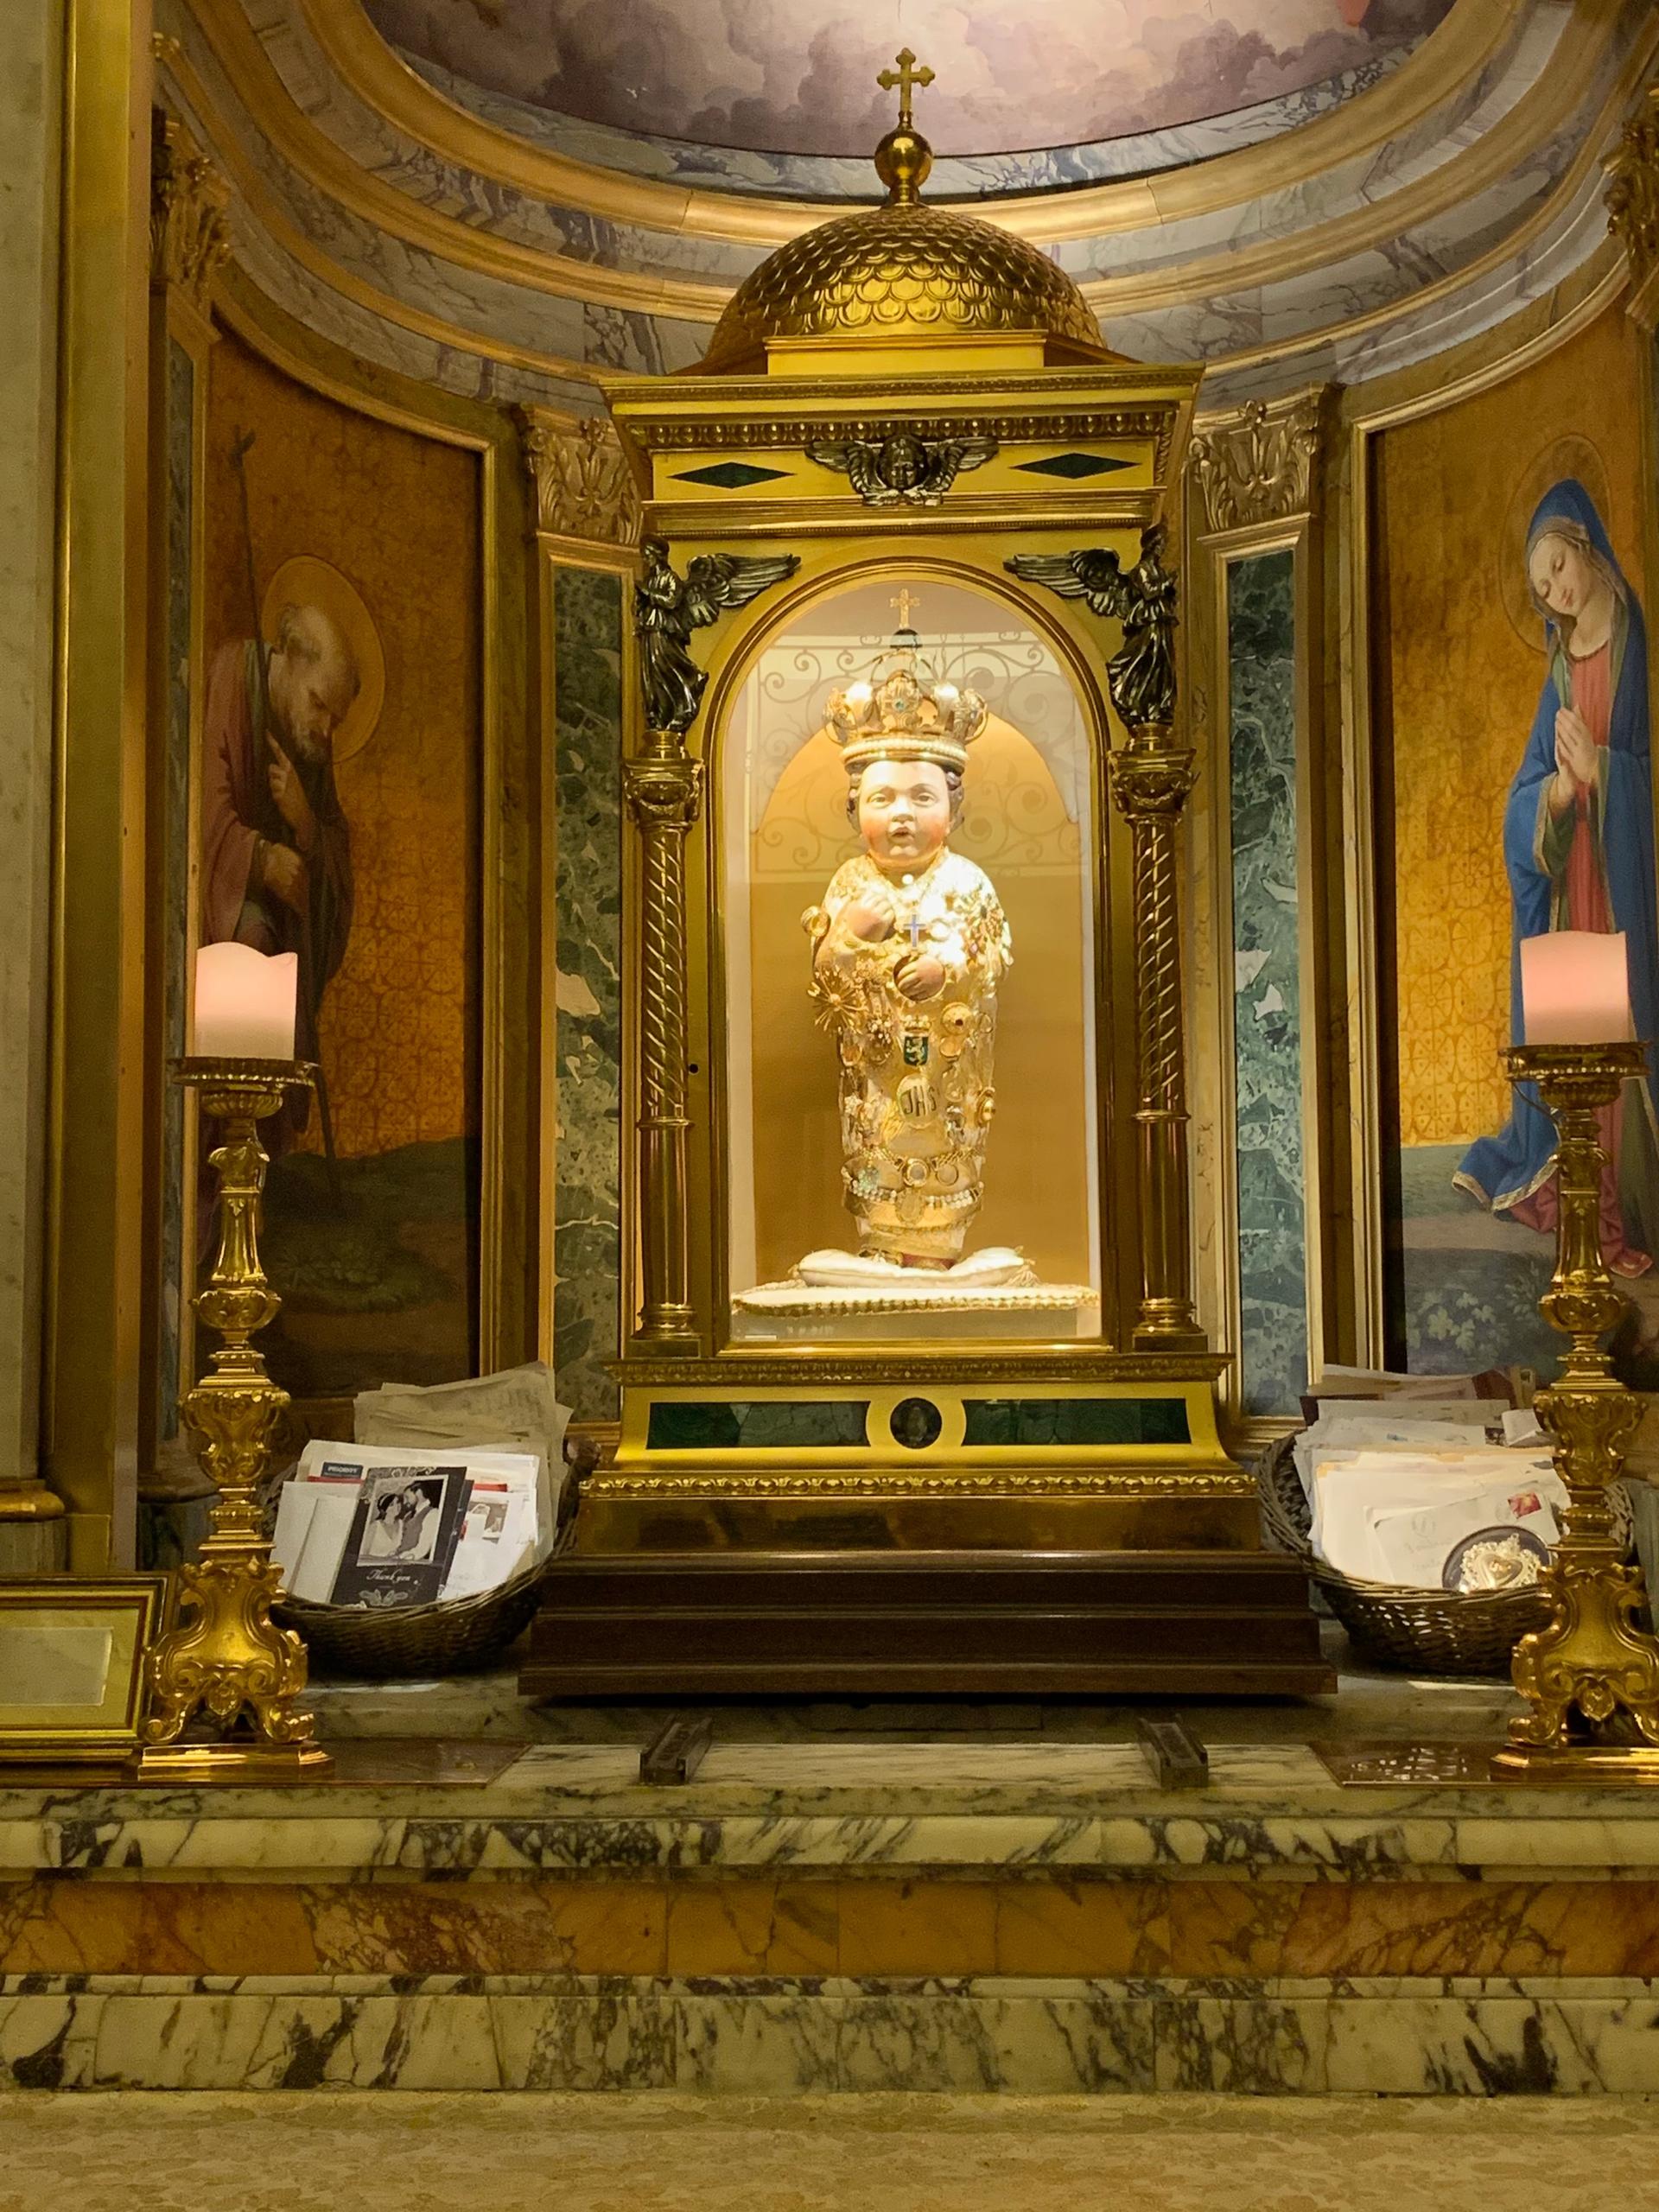 Popular devotion attaches itself to ugly or strange works, such as the Baby Jesus in Rome’s Santa Maria in Ara Coeli 